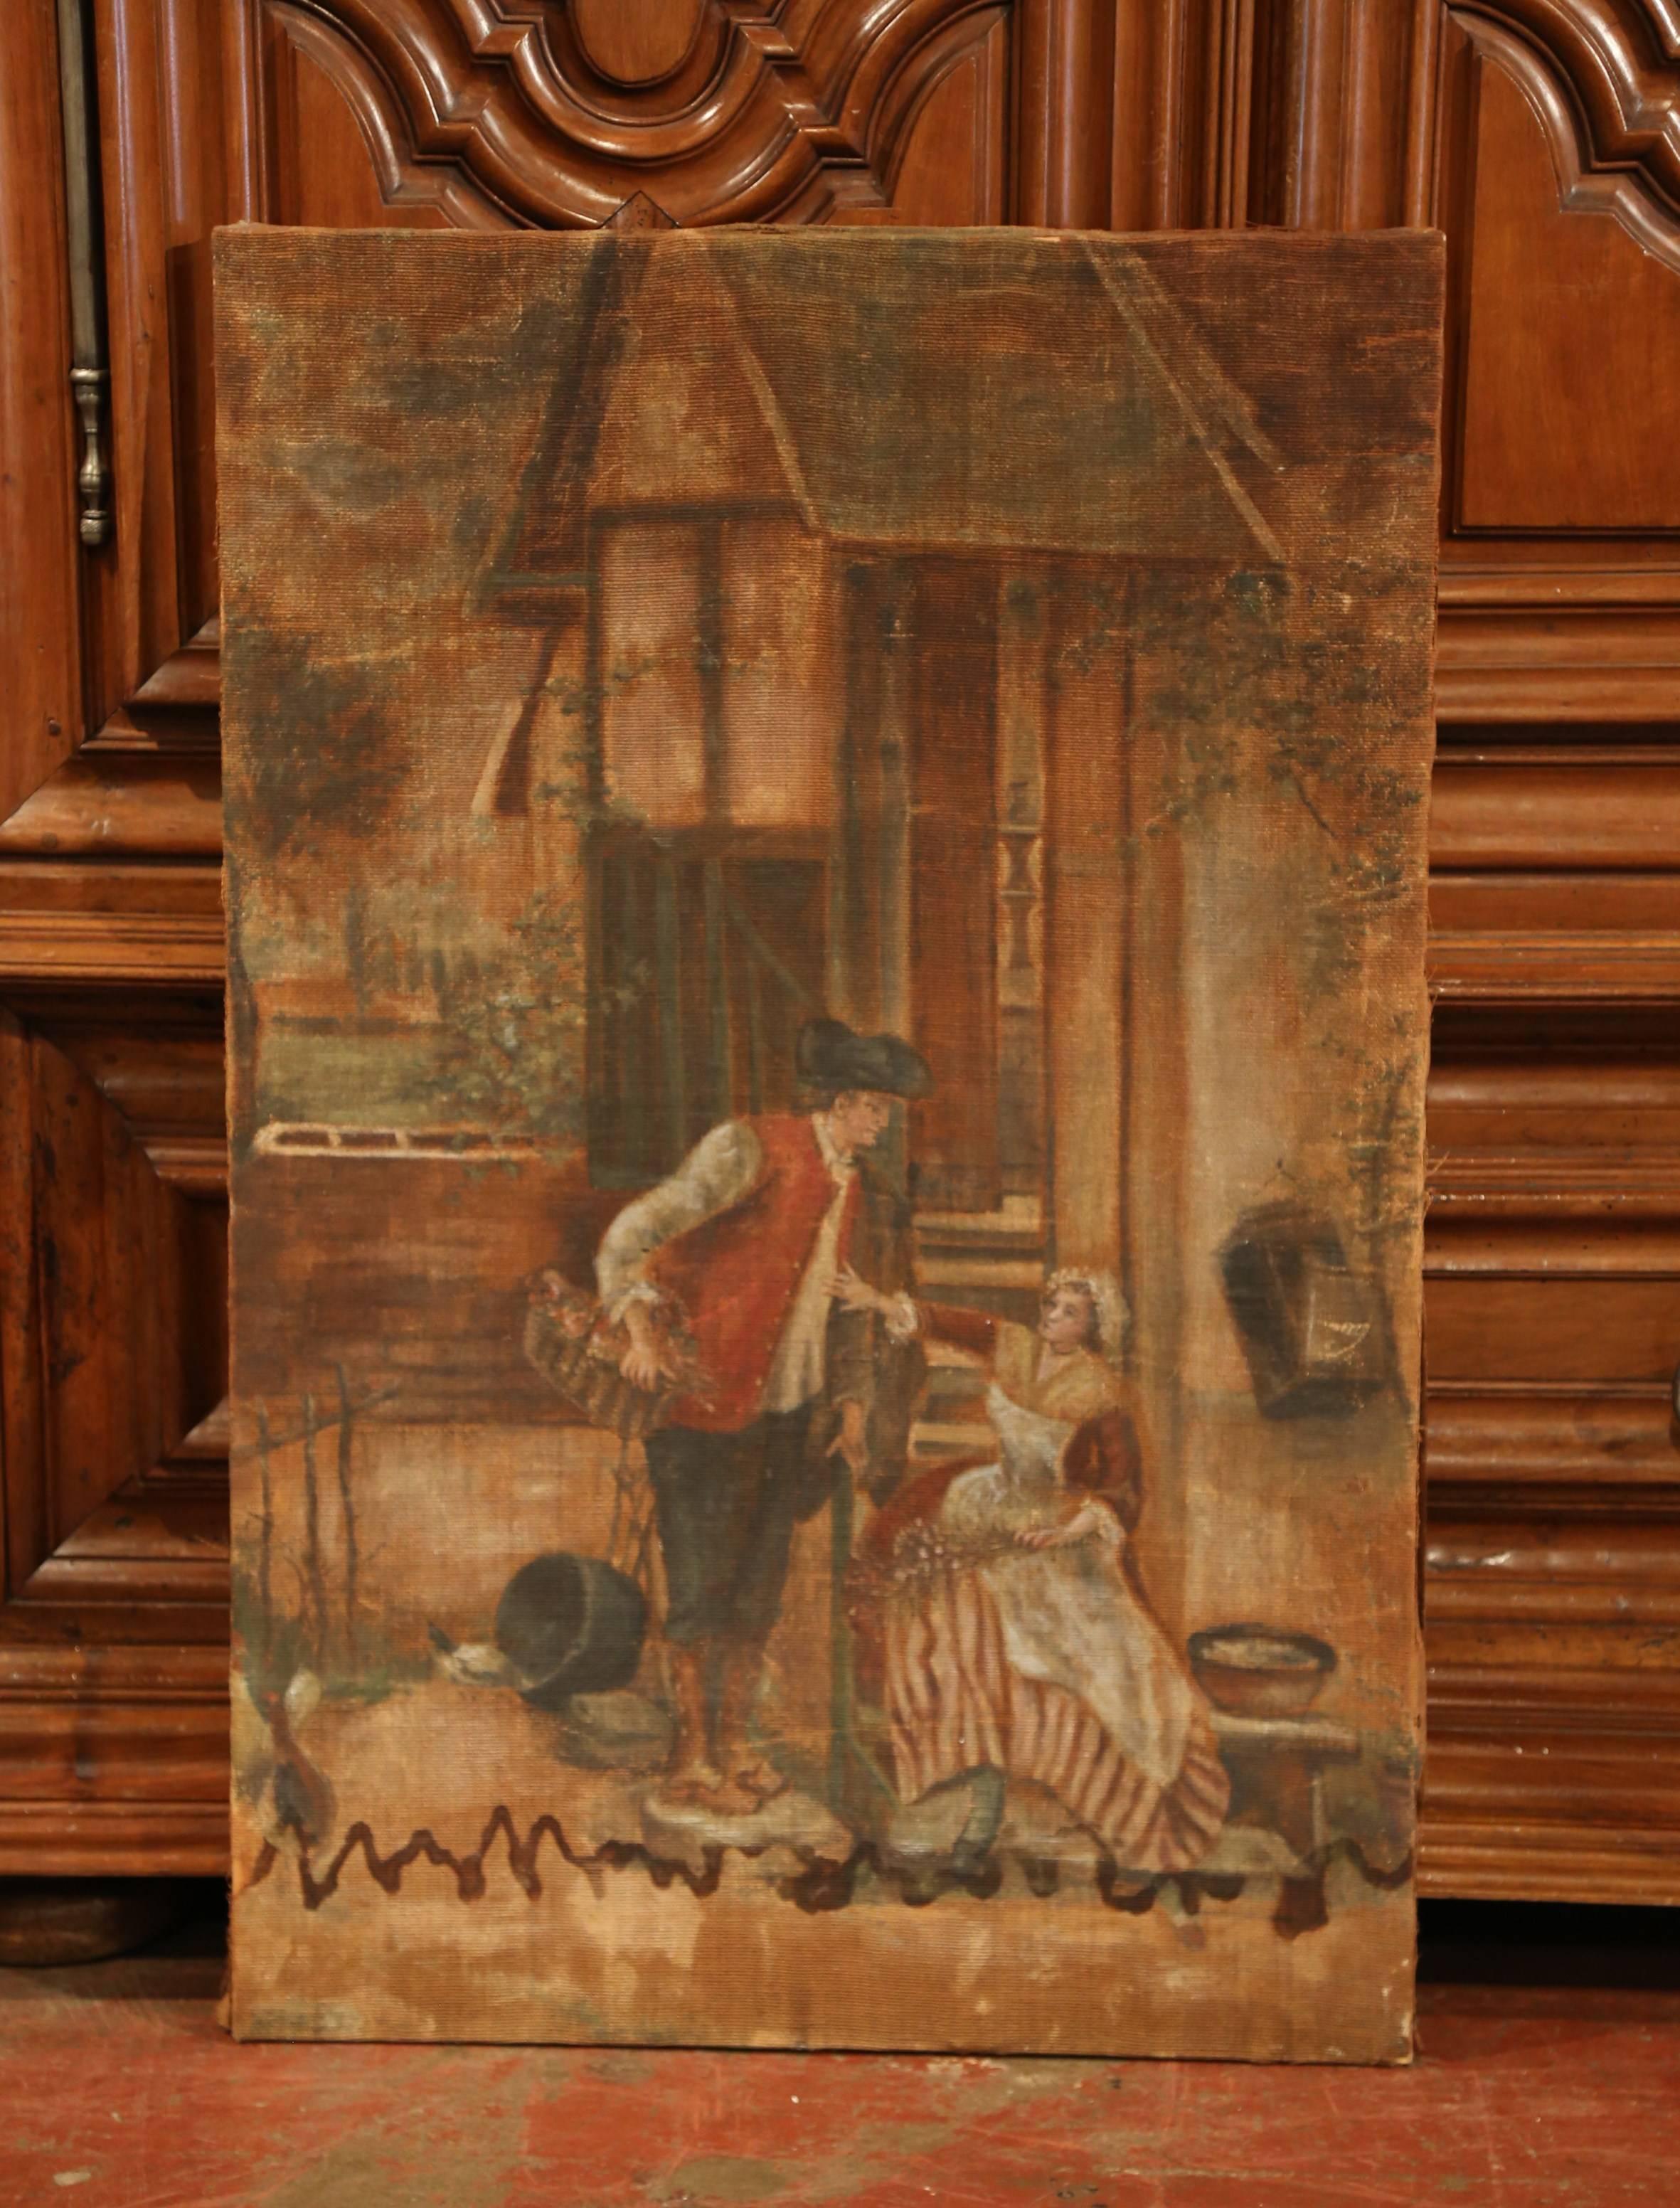 Hand-Painted 19th Century French Hand Painted Canvas on Stretcher with Courting Scene